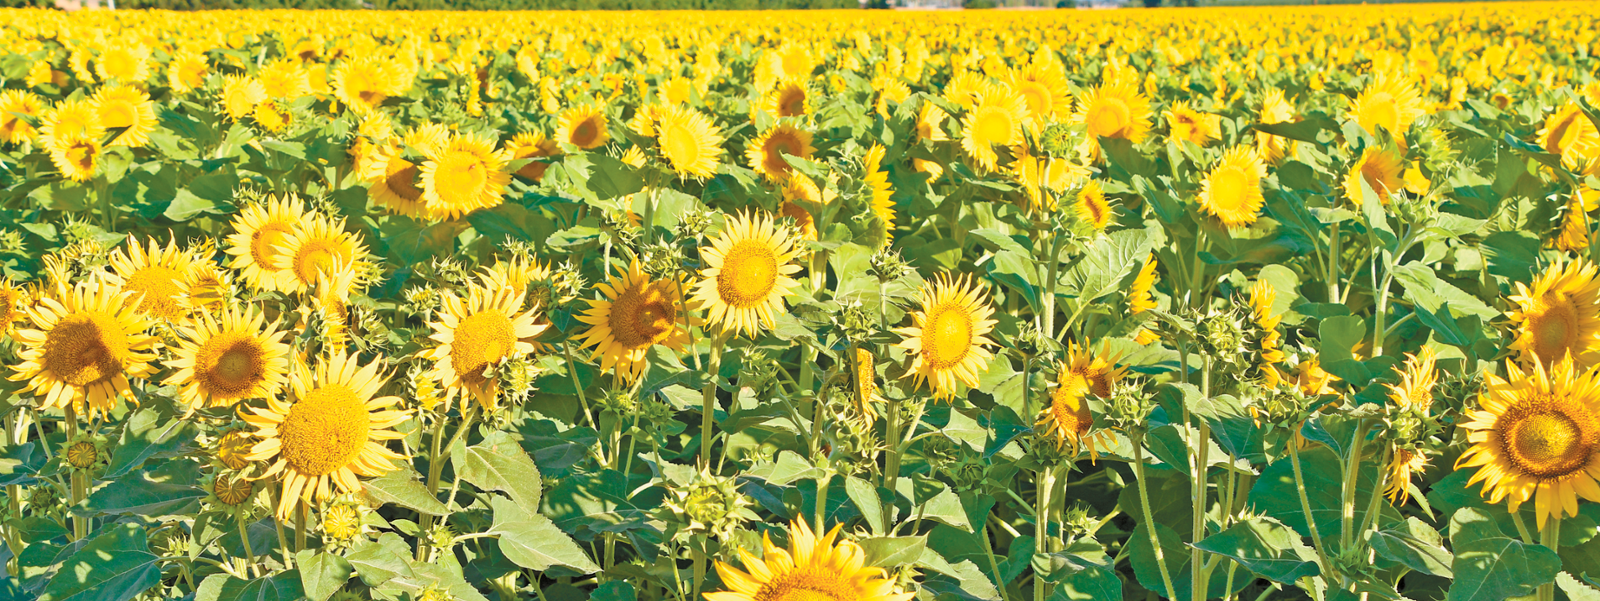 Sunflower seed firms leave state, impacting growers